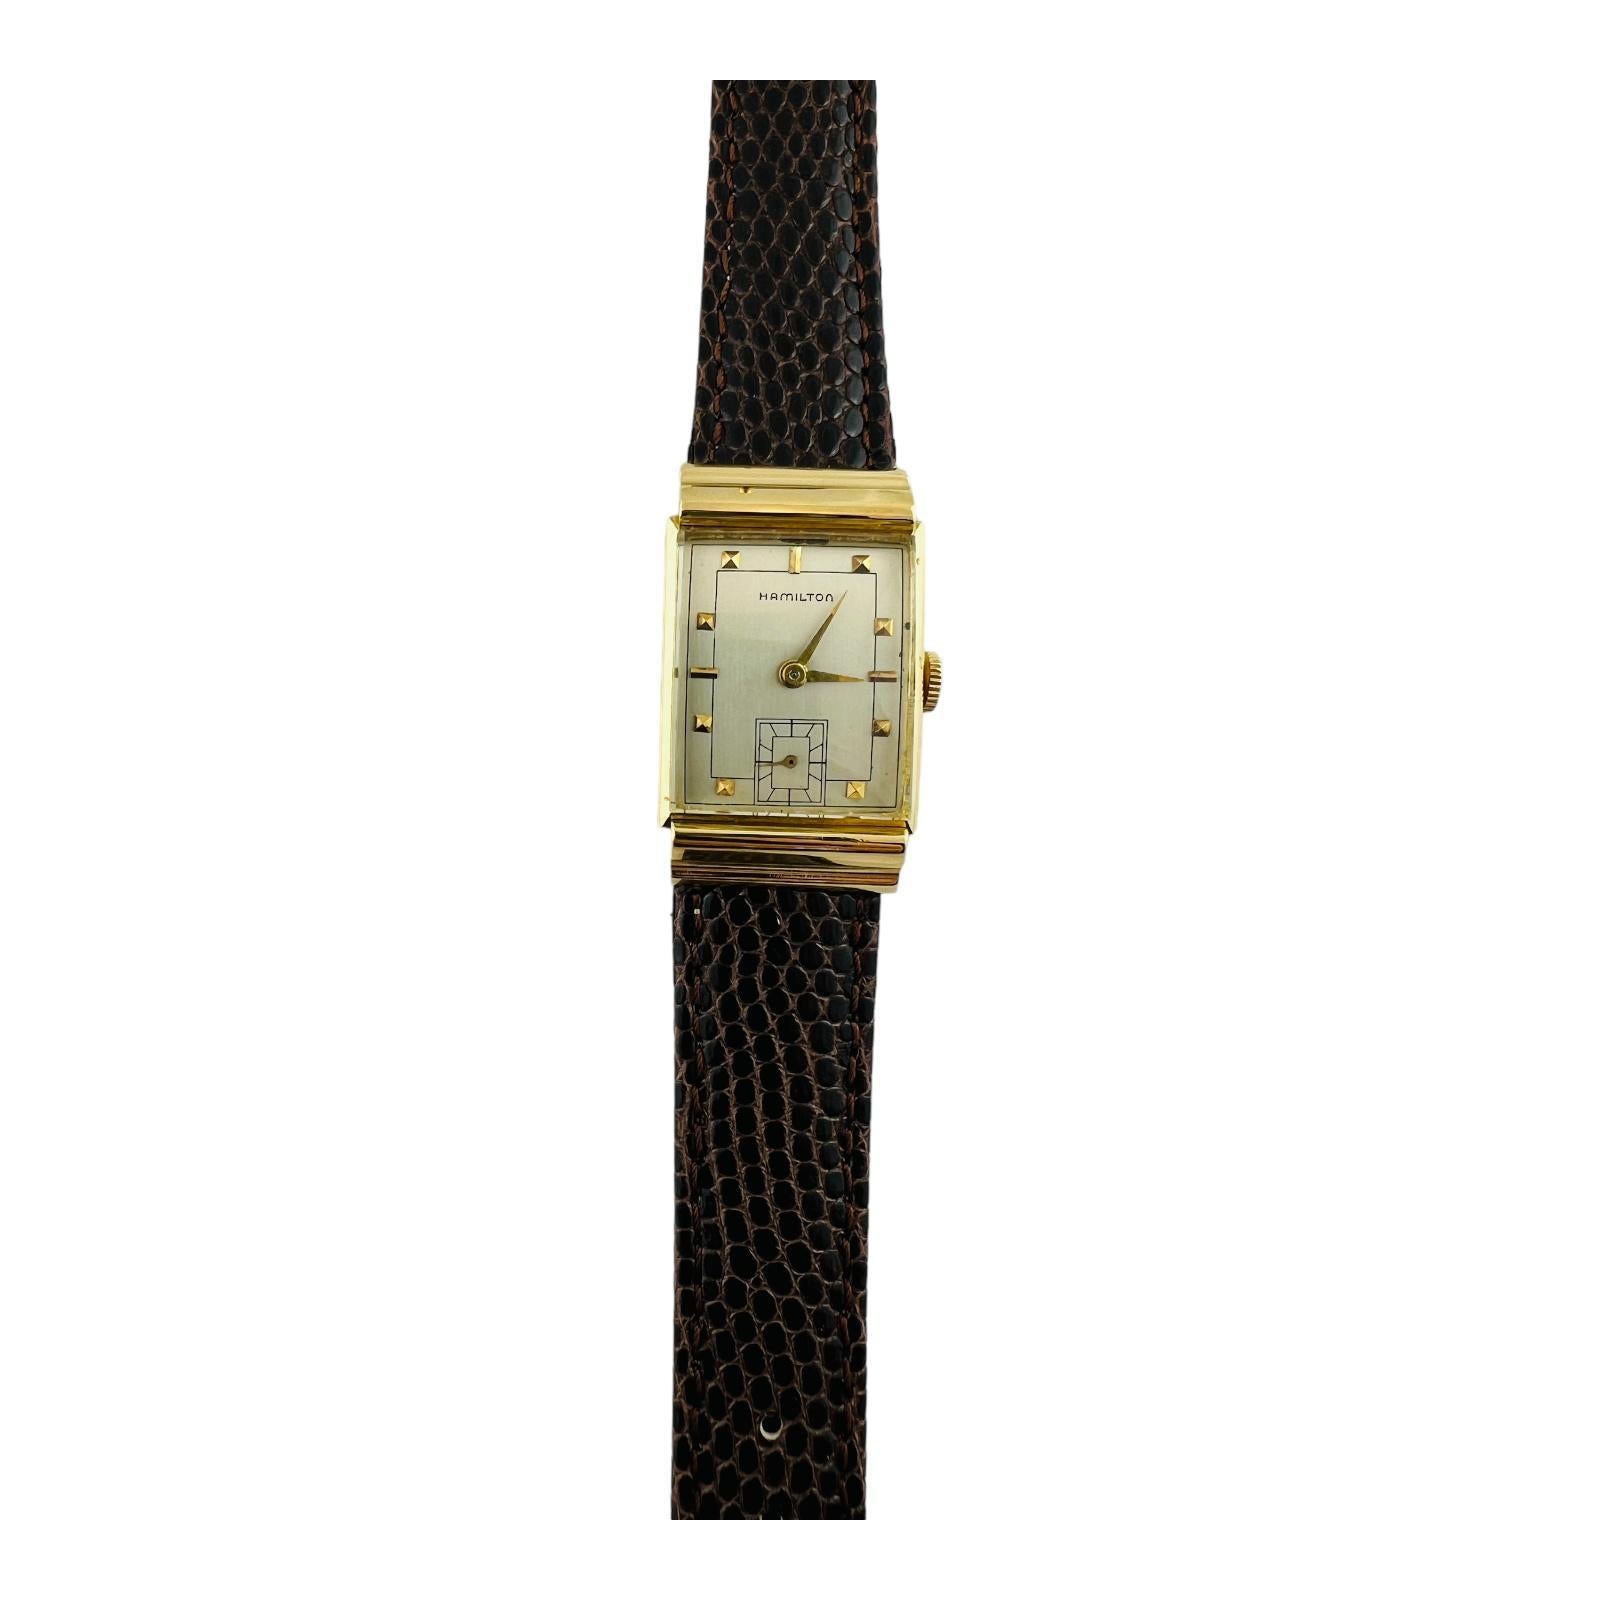 1940's Hamilton Gordon 18K Yellow Gold Watch Manual Men's Watch #15797 In Good Condition For Sale In Washington Depot, CT